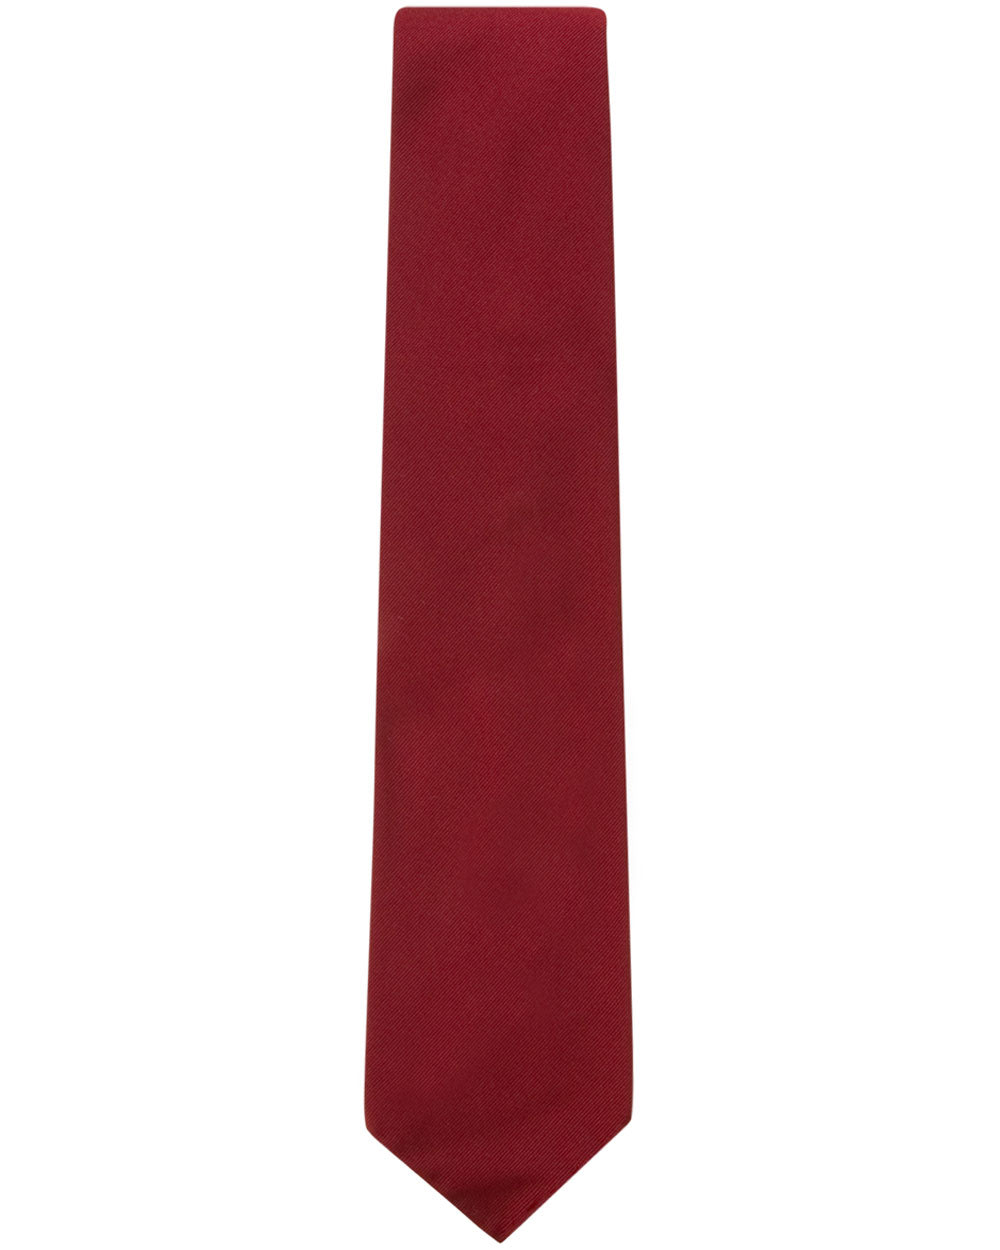 Solid Red Tie